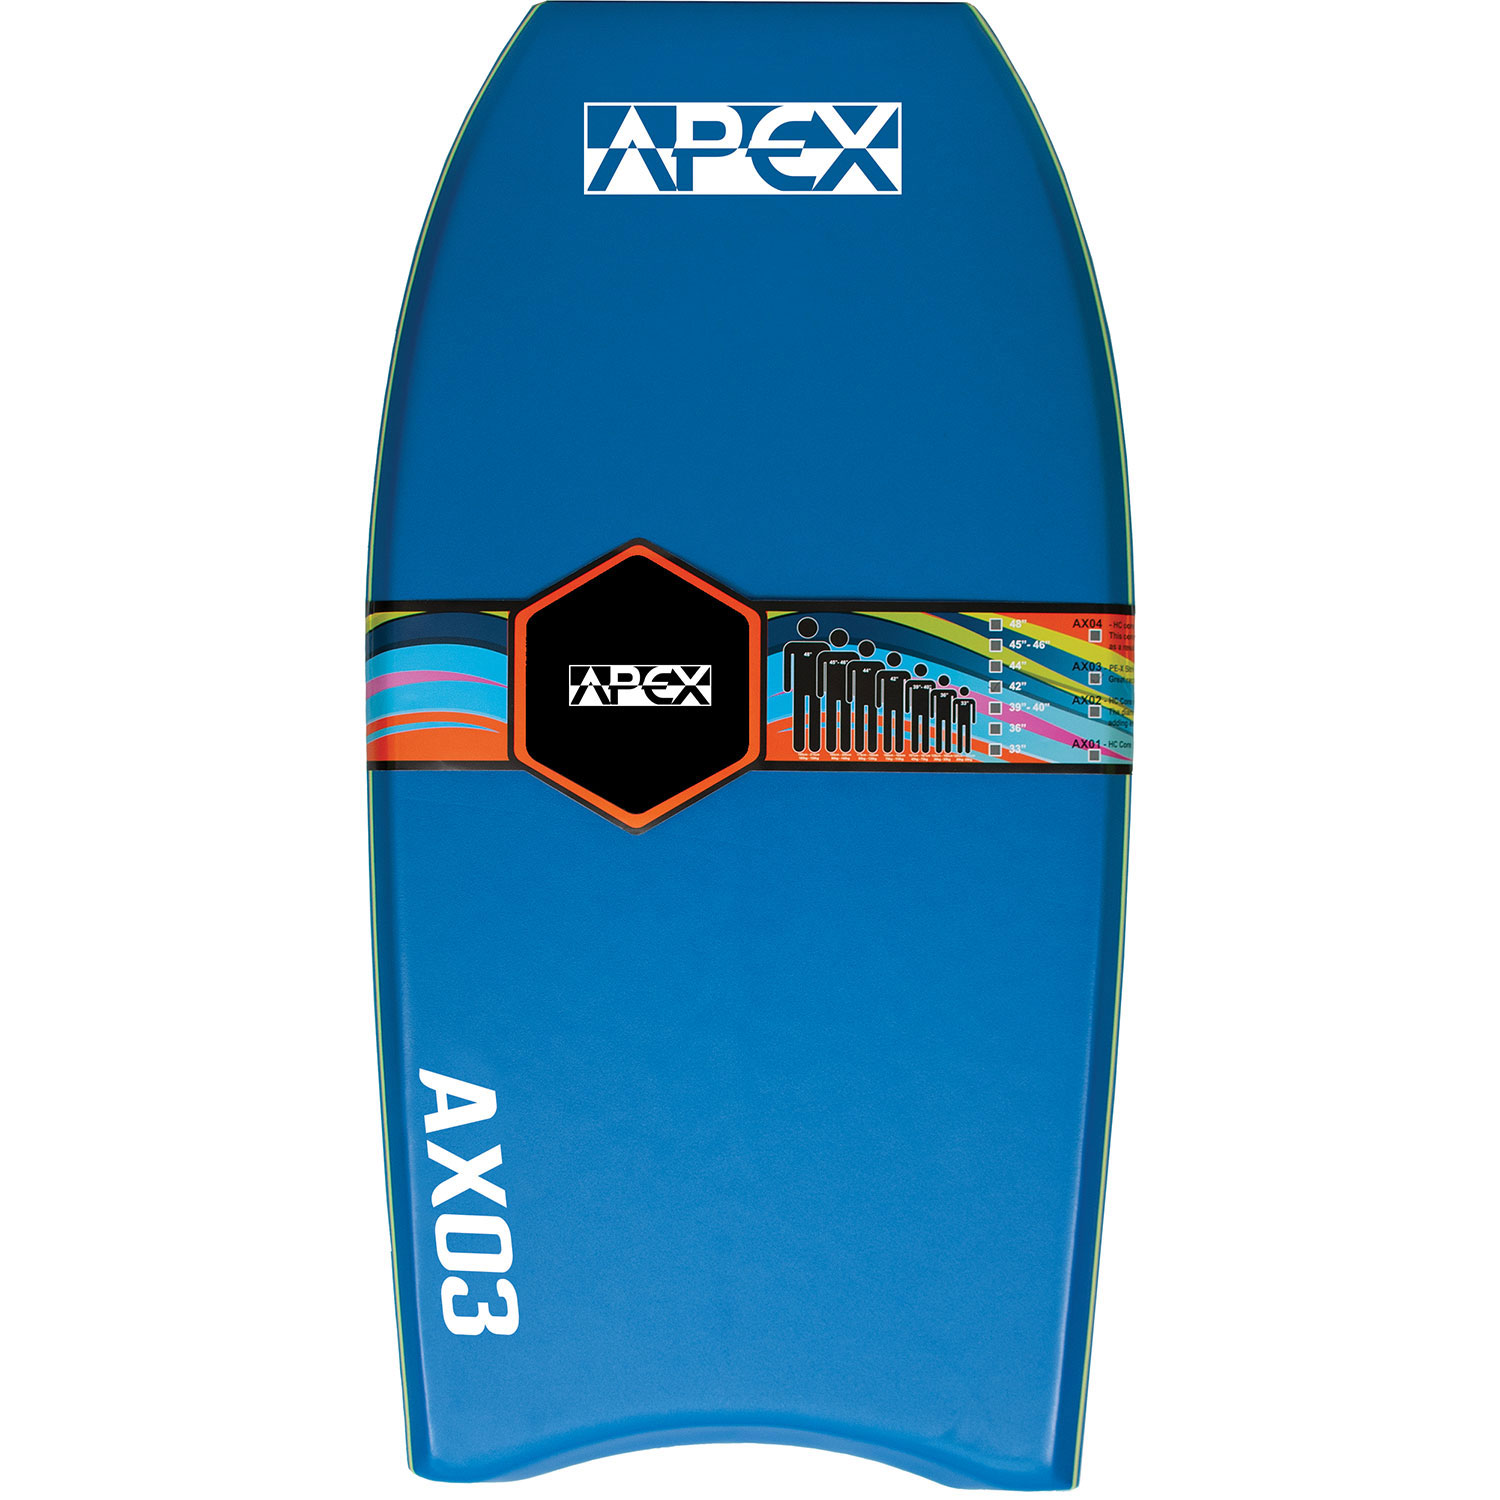 Alder APEX-03 PE Pro Bodyboard - Blue/Lime | Coast Water Sports Deals on Sailing Clothing | Drysuits and Watersports Equipment